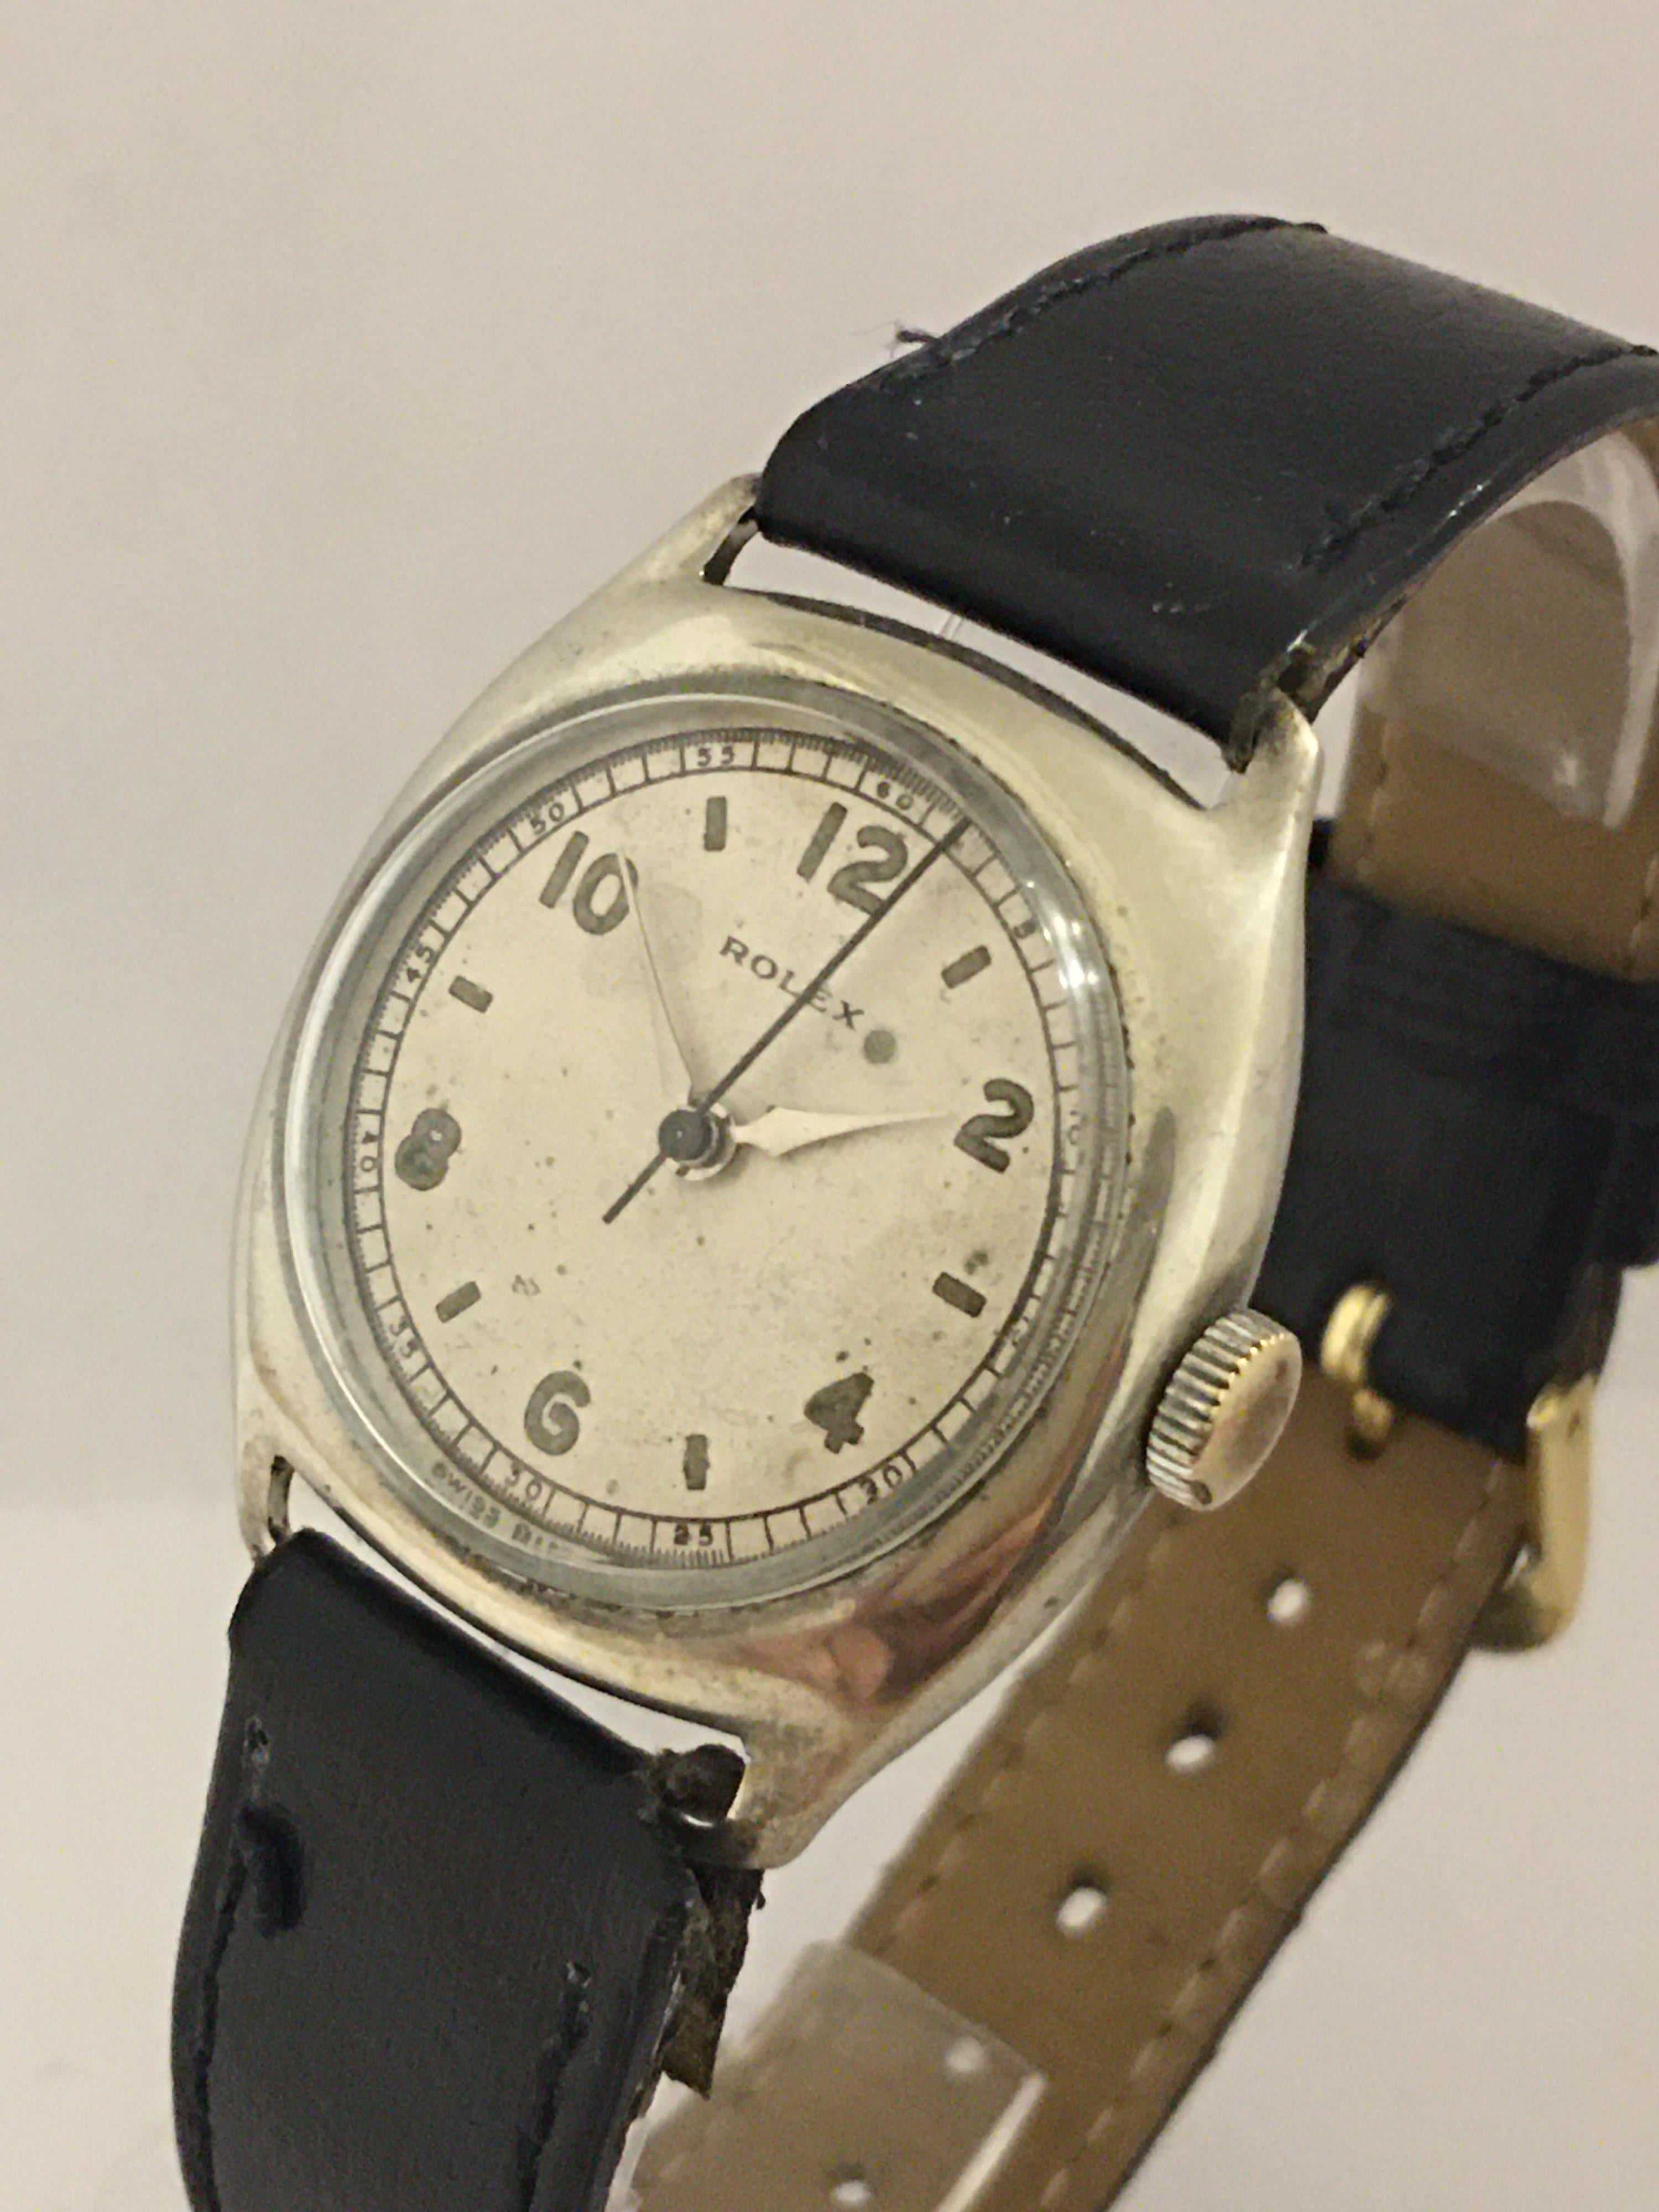 1930 rolex clear back